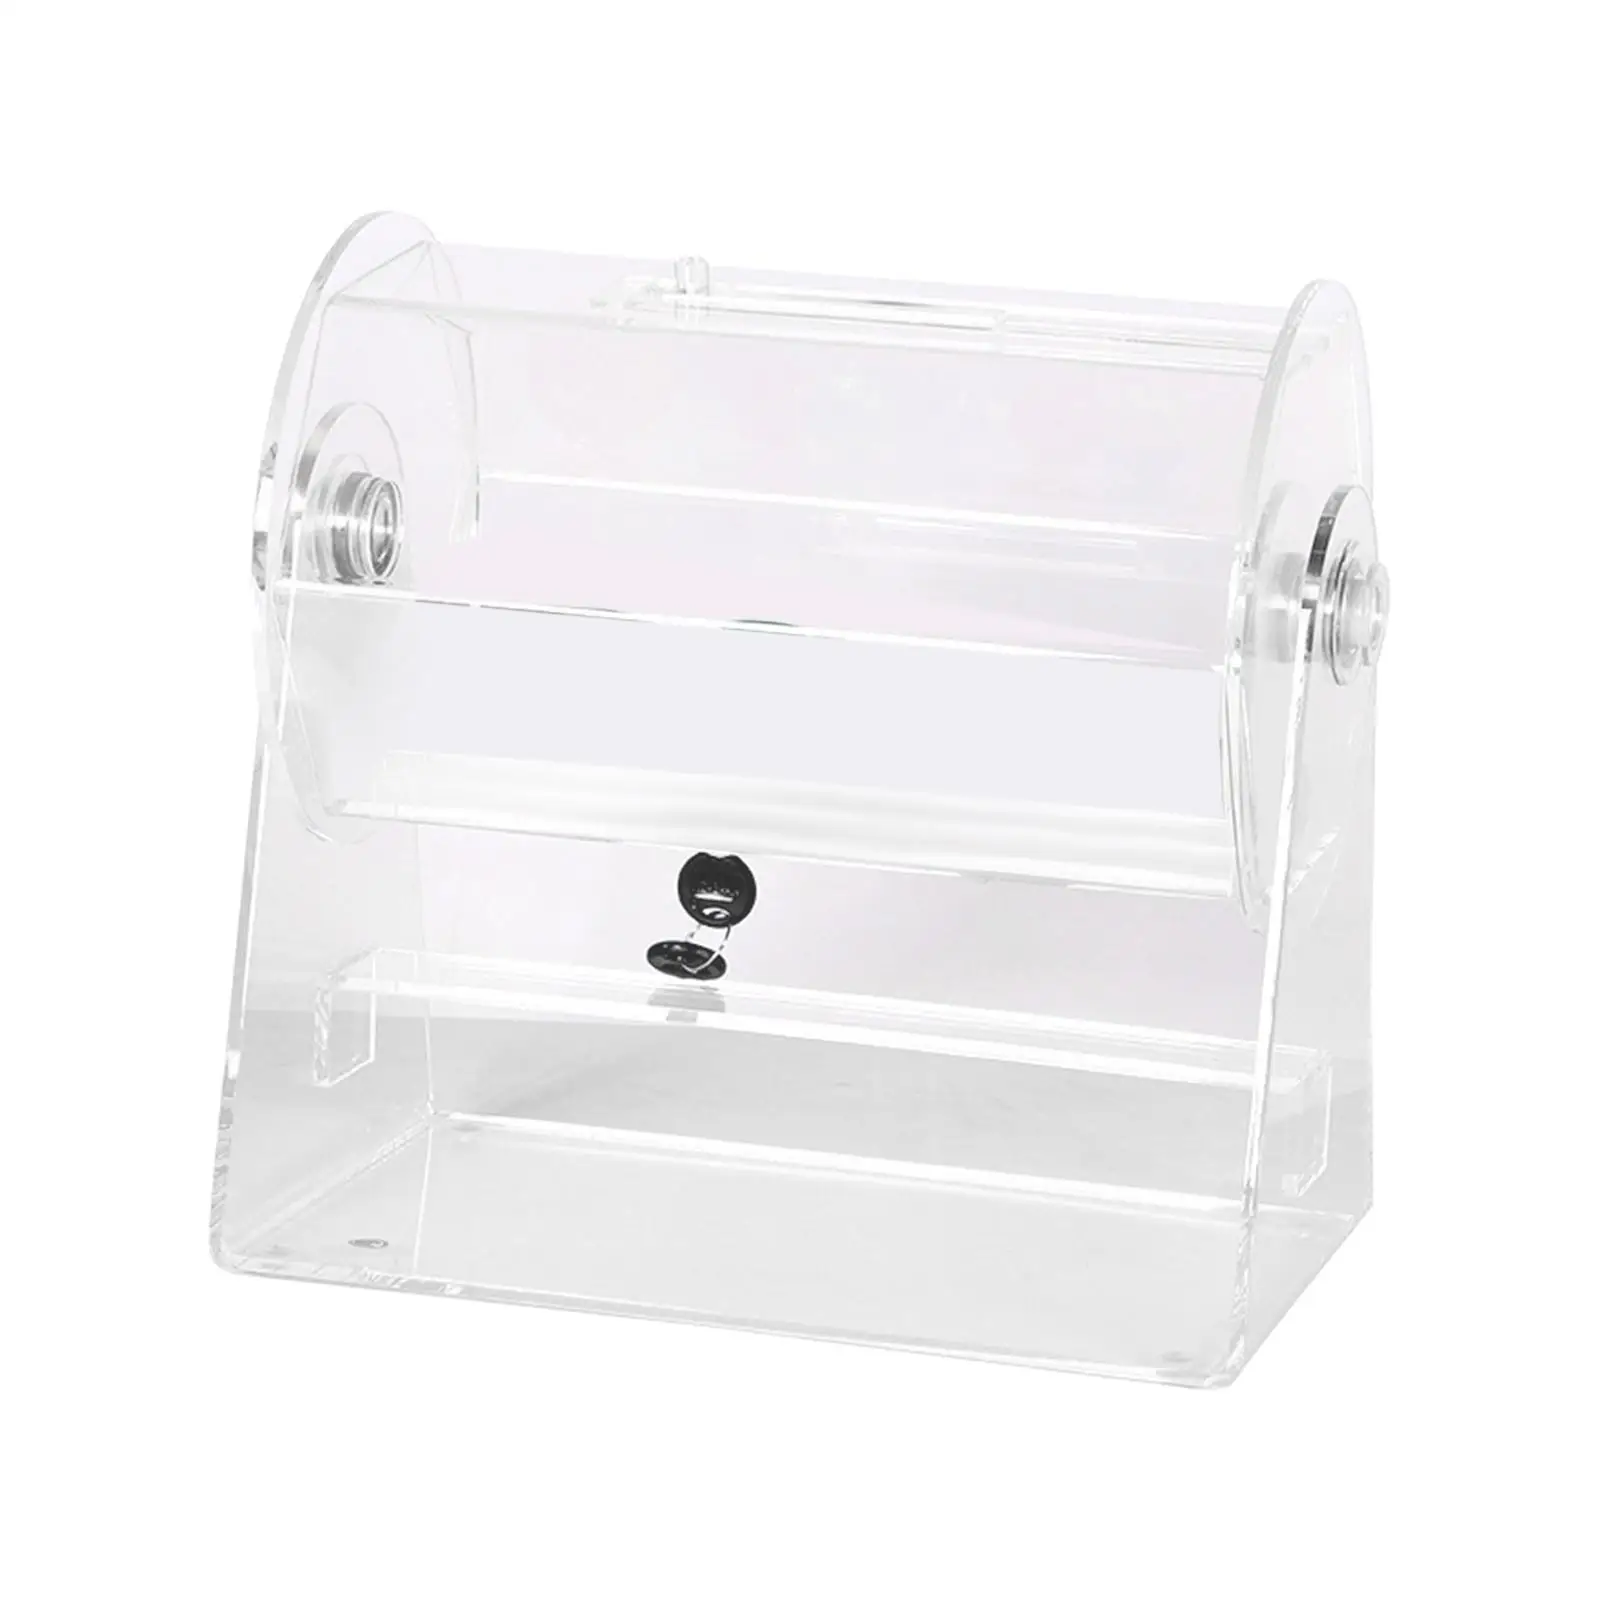 Acrylic Raffle Drum Parent Child Games Raffle Case Turntable Selection Machine Lottery Machine for Holiday Lotteries Party Home